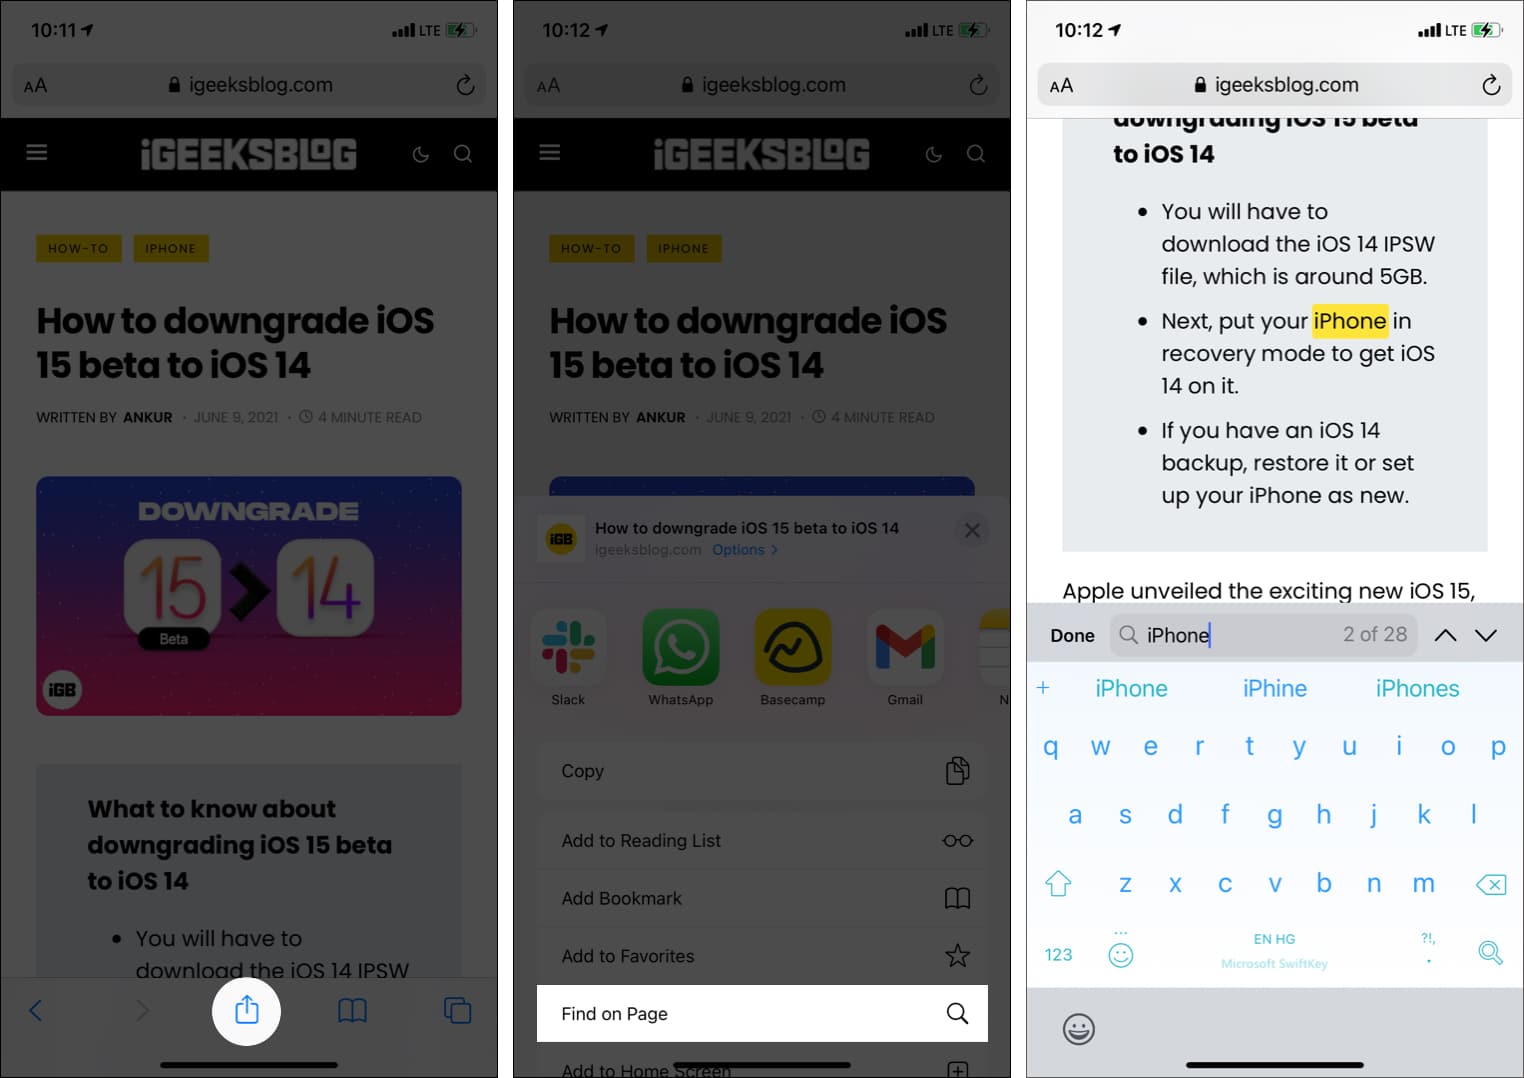 How to search text on iPhone Safari using iOS Share Sheet